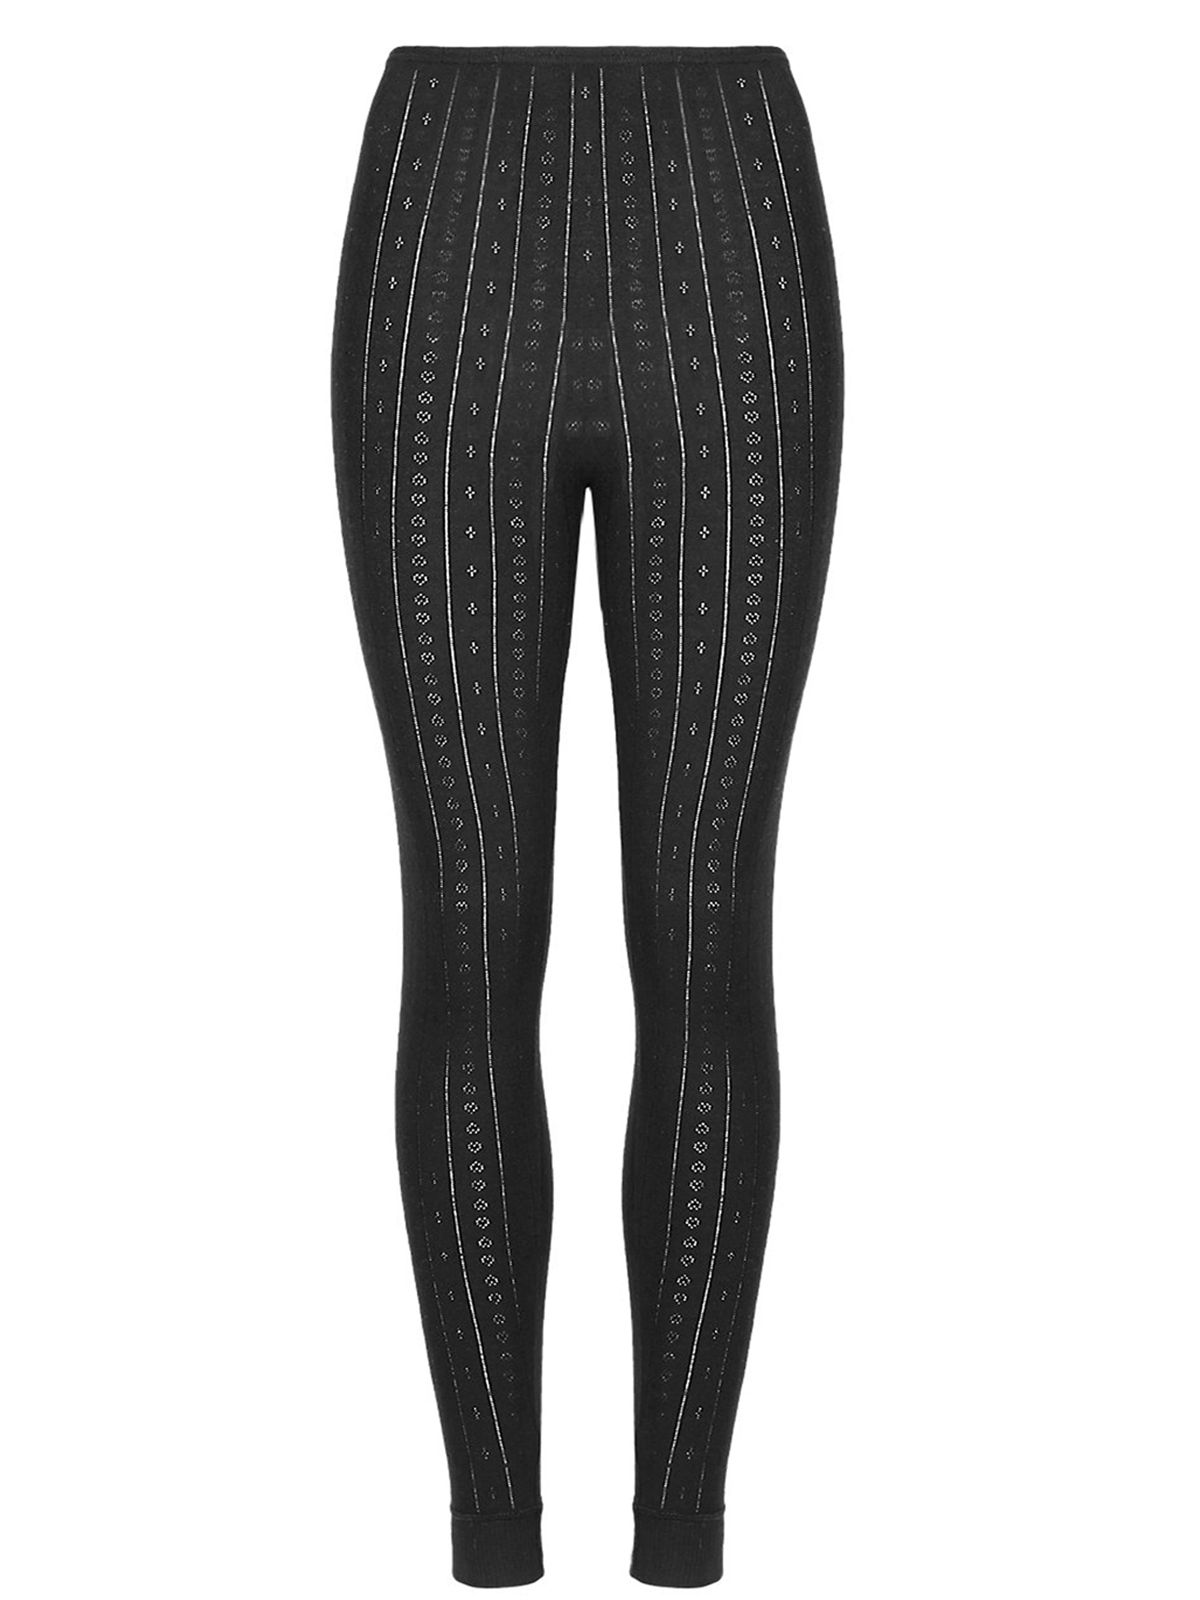 Marks and Spencer - - M&5 BLACK Thermal Ankle Length Leggings - Size 12 ...